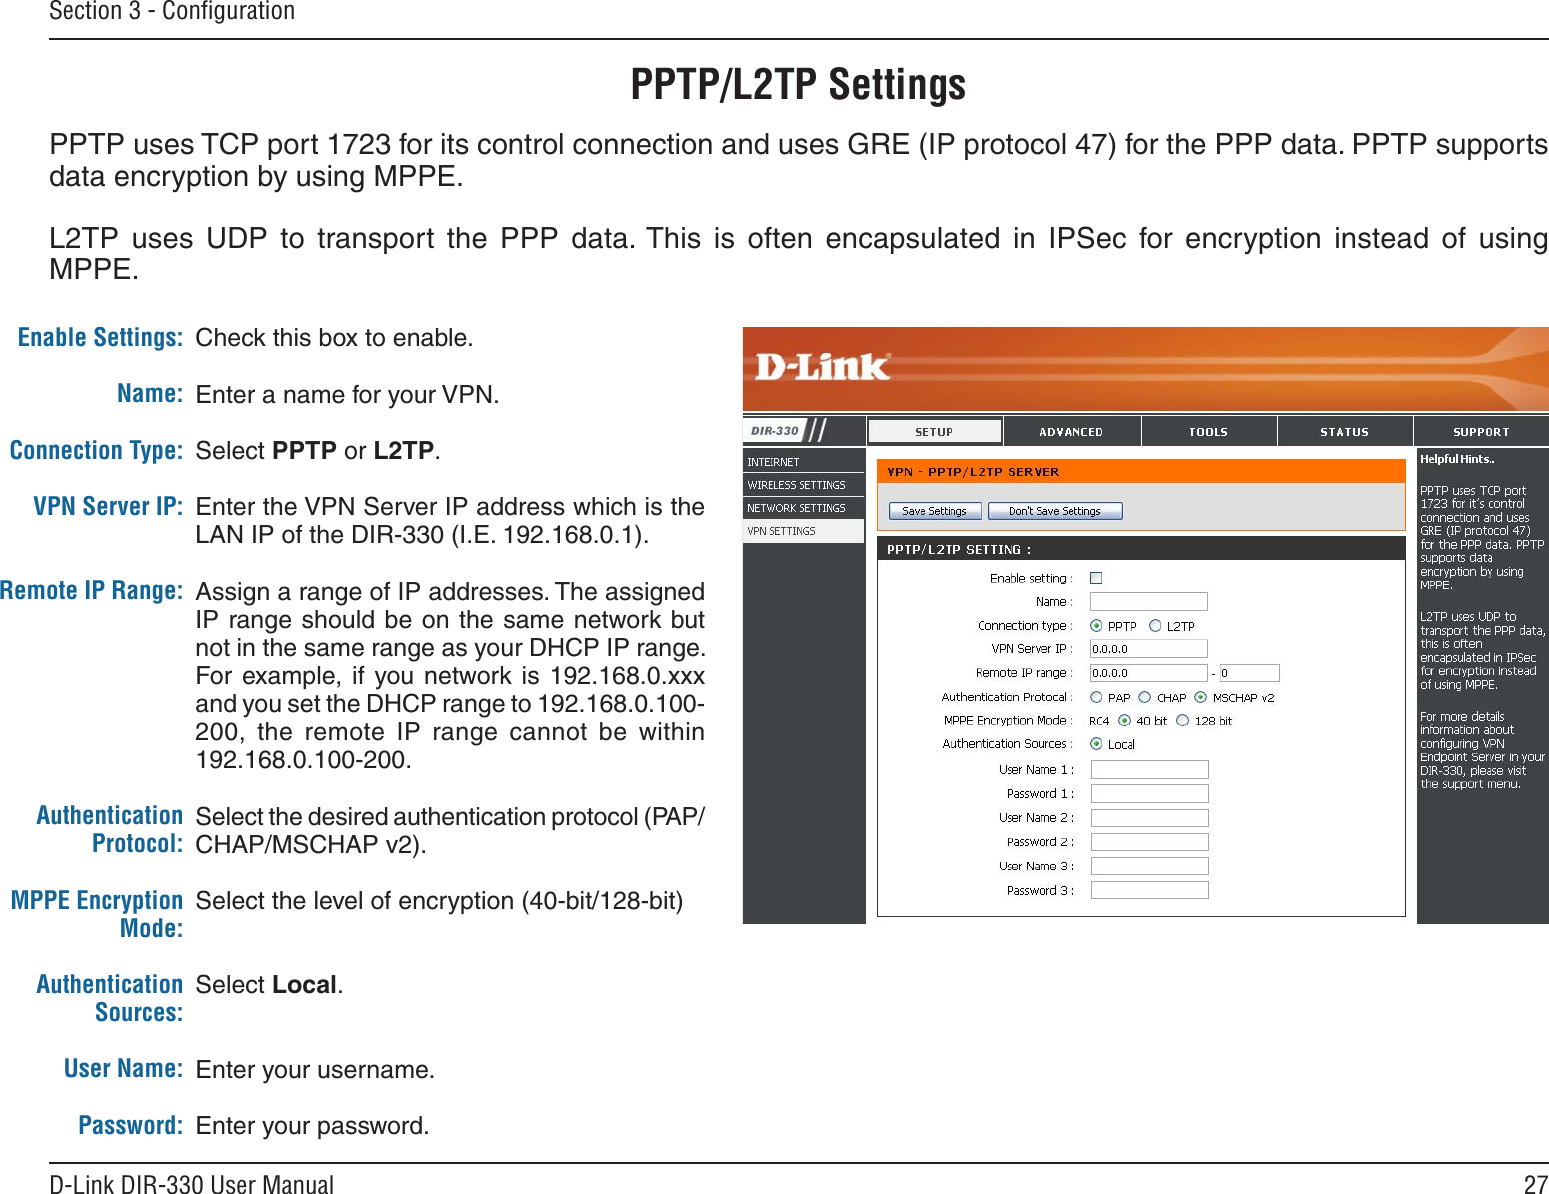 27D-Link DIR-330 User ManualSection 3 - ConﬁgurationPPTP/L2TP SettingsCheck this box to enable.Enter a name for your VPN.Select PPTP or L2TP.Enter the VPN Server IP address which is the LAN IP of the DIR-330 (I.E. 192.168.0.1).Assign a range of IP addresses. The assigned IP range should be on the same network but not in the same range as your DHCP IP range. For  example, if  you network is 192.168.0.xxx and you set the DHCP range to 192.168.0.100-200,  the  remote  IP  range  cannot  be  within 192.168.0.100-200.Select the desired authentication protocol (PAP/CHAP/MSCHAP v2).Select the level of encryption (40-bit/128-bit)Select Local.Enter your username.Enter your password.Enable Settings:Name:Connection Type:VPN Server IP:Remote IP Range:Authentication Protocol:MPPE Encryption Mode:Authentication Sources:User Name:Password:PPTP uses TCP port 1723 for its control connection and uses GRE (IP protocol 47) for the PPP data. PPTP supports data encryption by using MPPE.L2TP  uses  UDP  to  transport  the  PPP  data. This  is  often  encapsulated  in  IPSec  for  encryption  instead  of  using MPPE. 